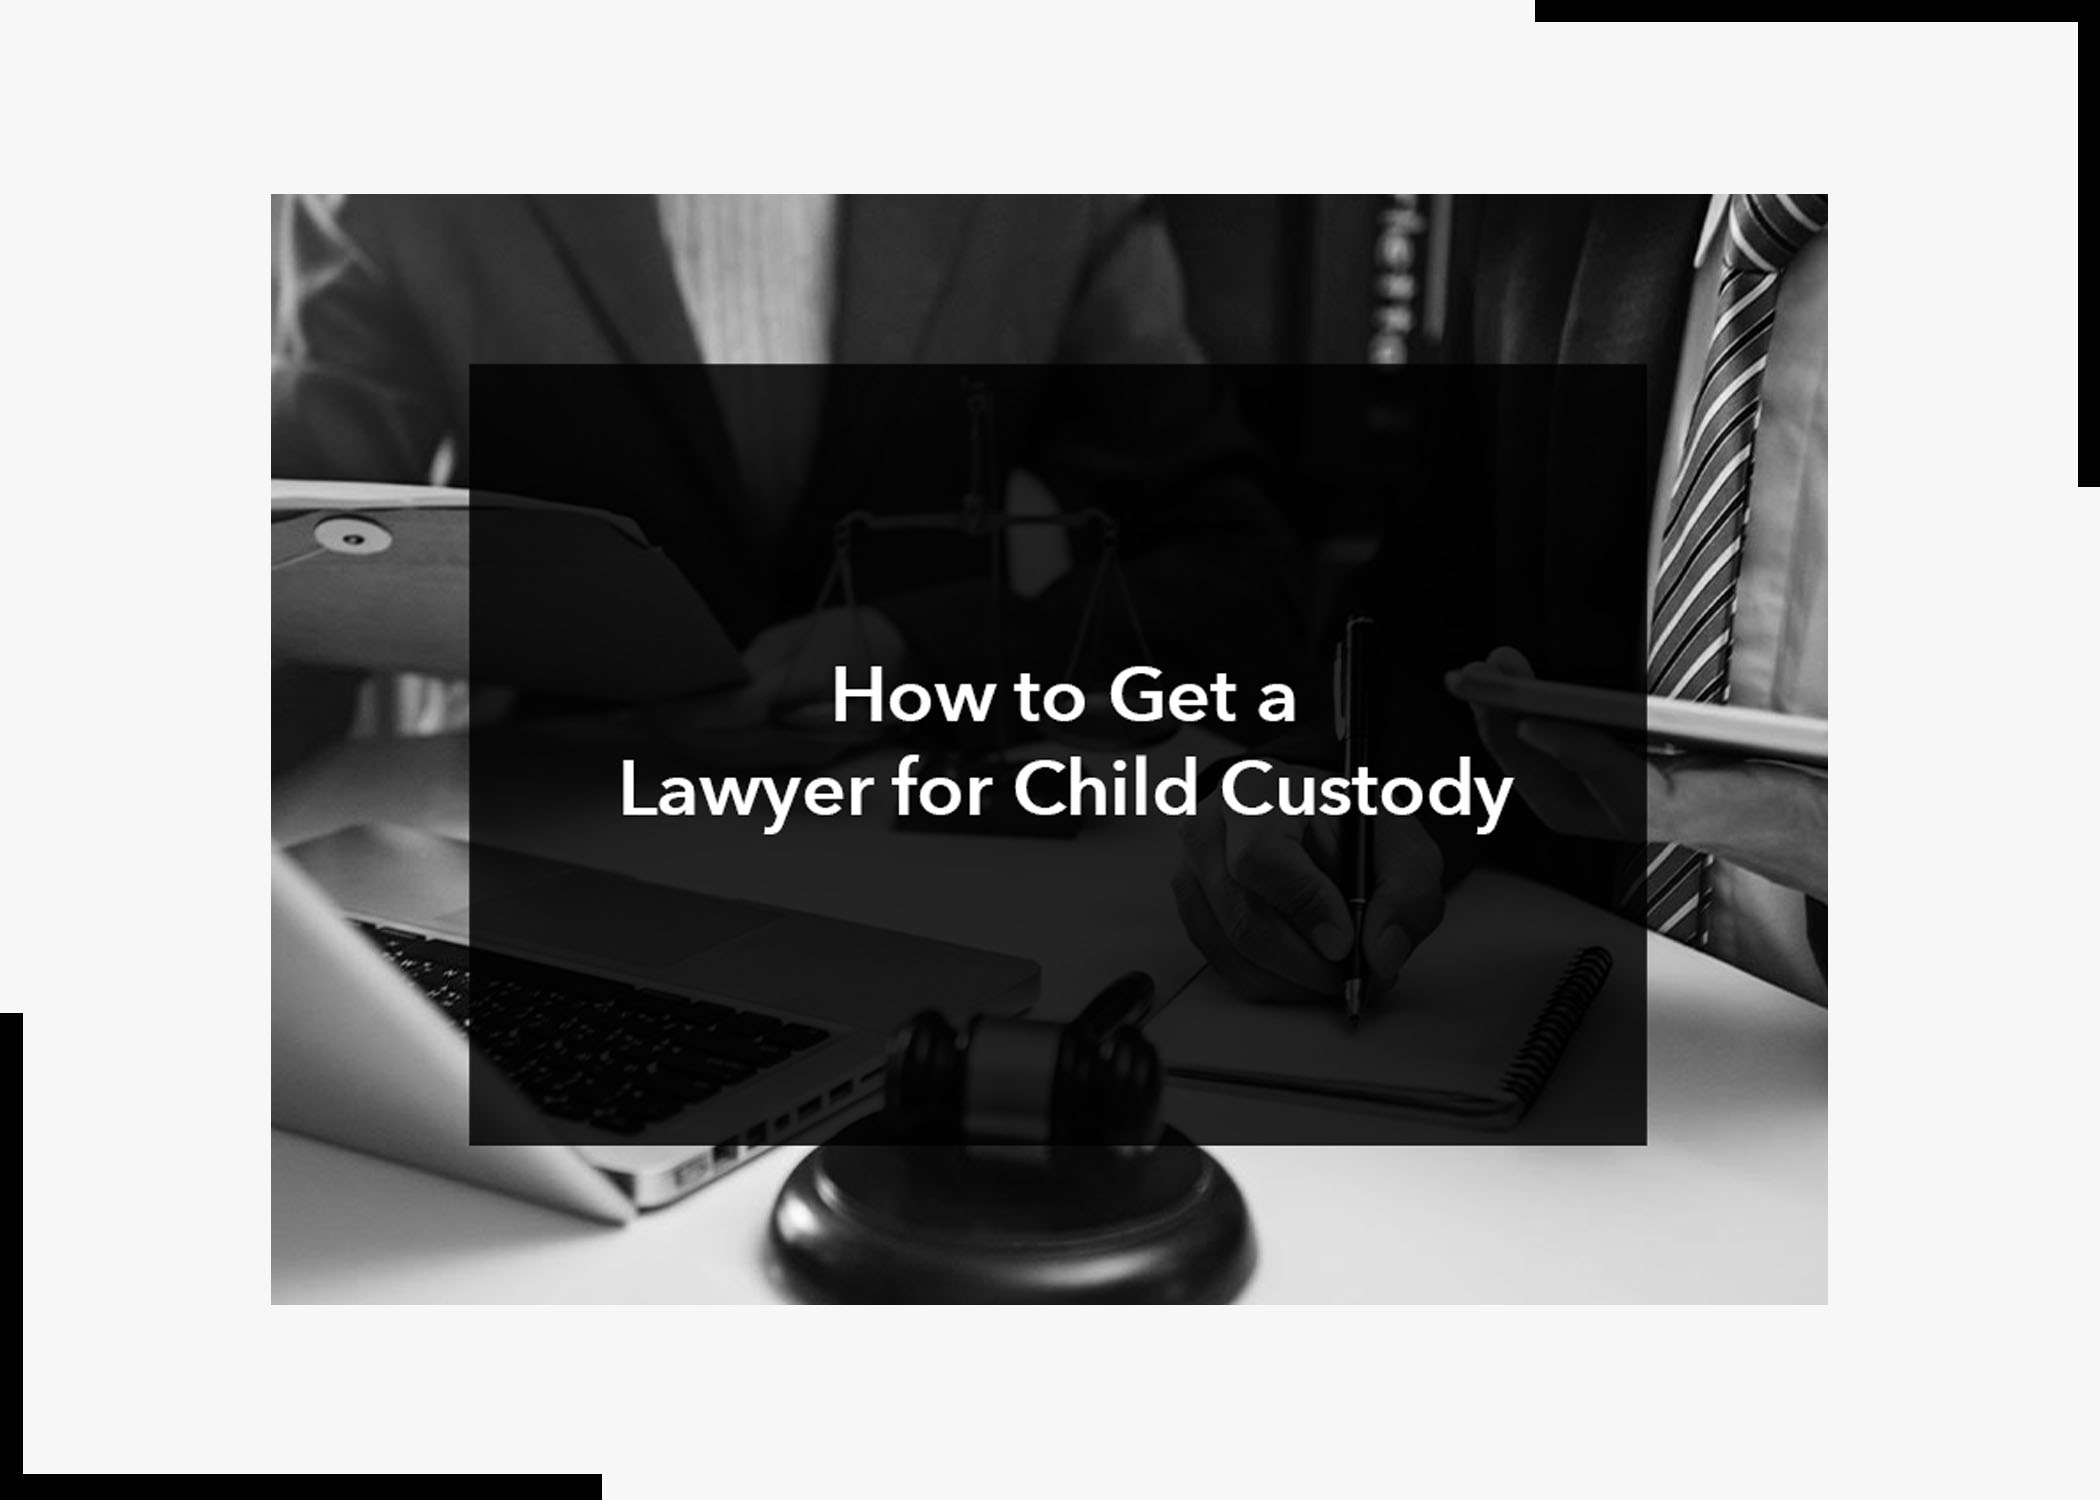 How to Get a Lawyer for Child Custody